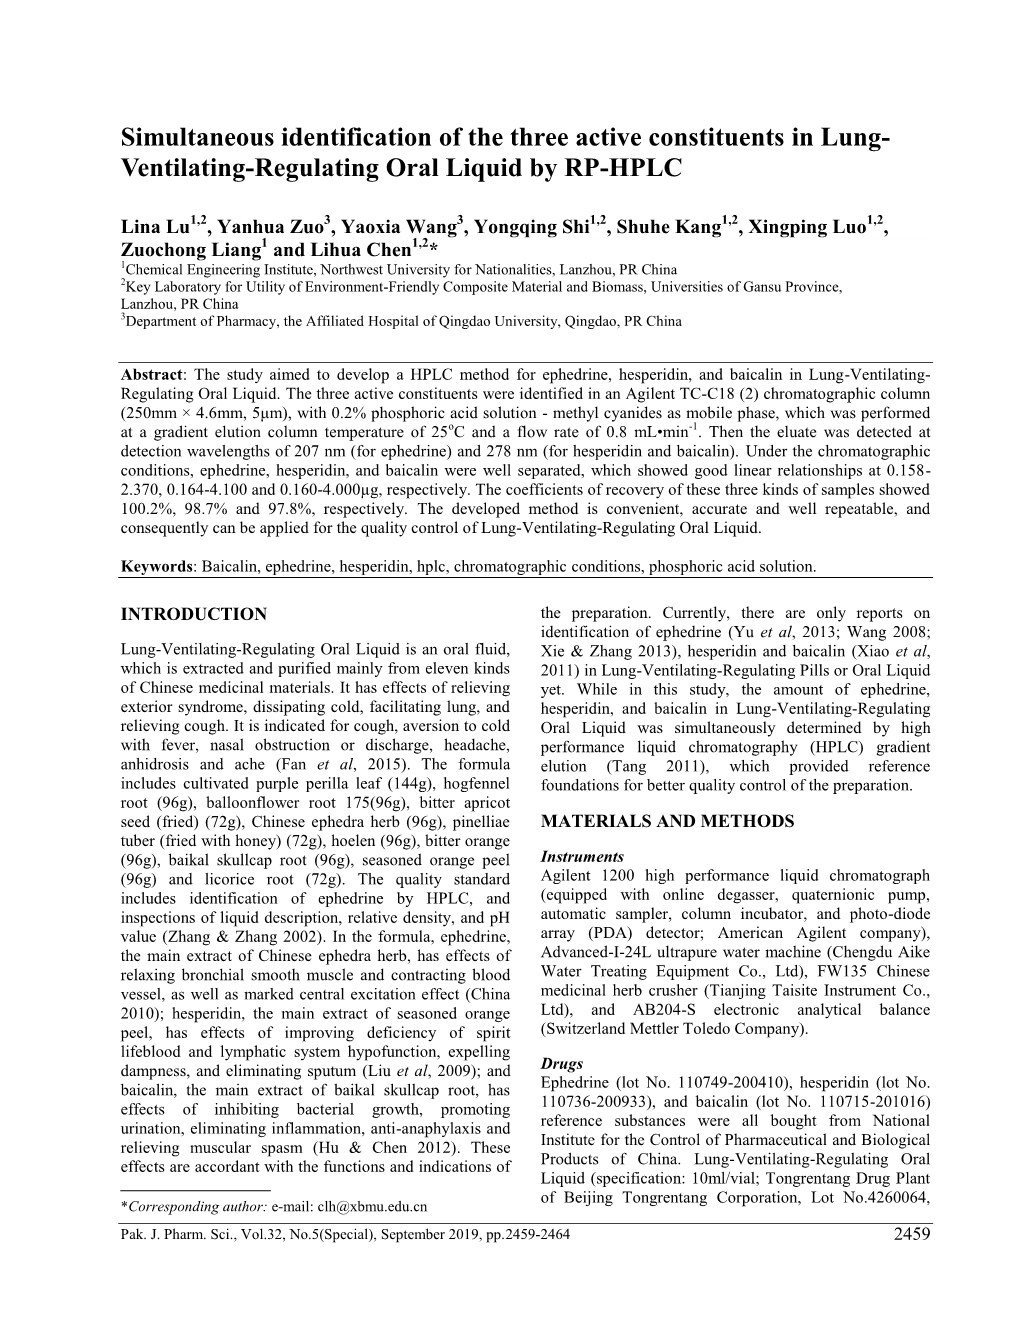 Simultaneous Identification of the Three Active Constituents in Lung- Ventilating-Regulating Oral Liquid by RP-HPLC